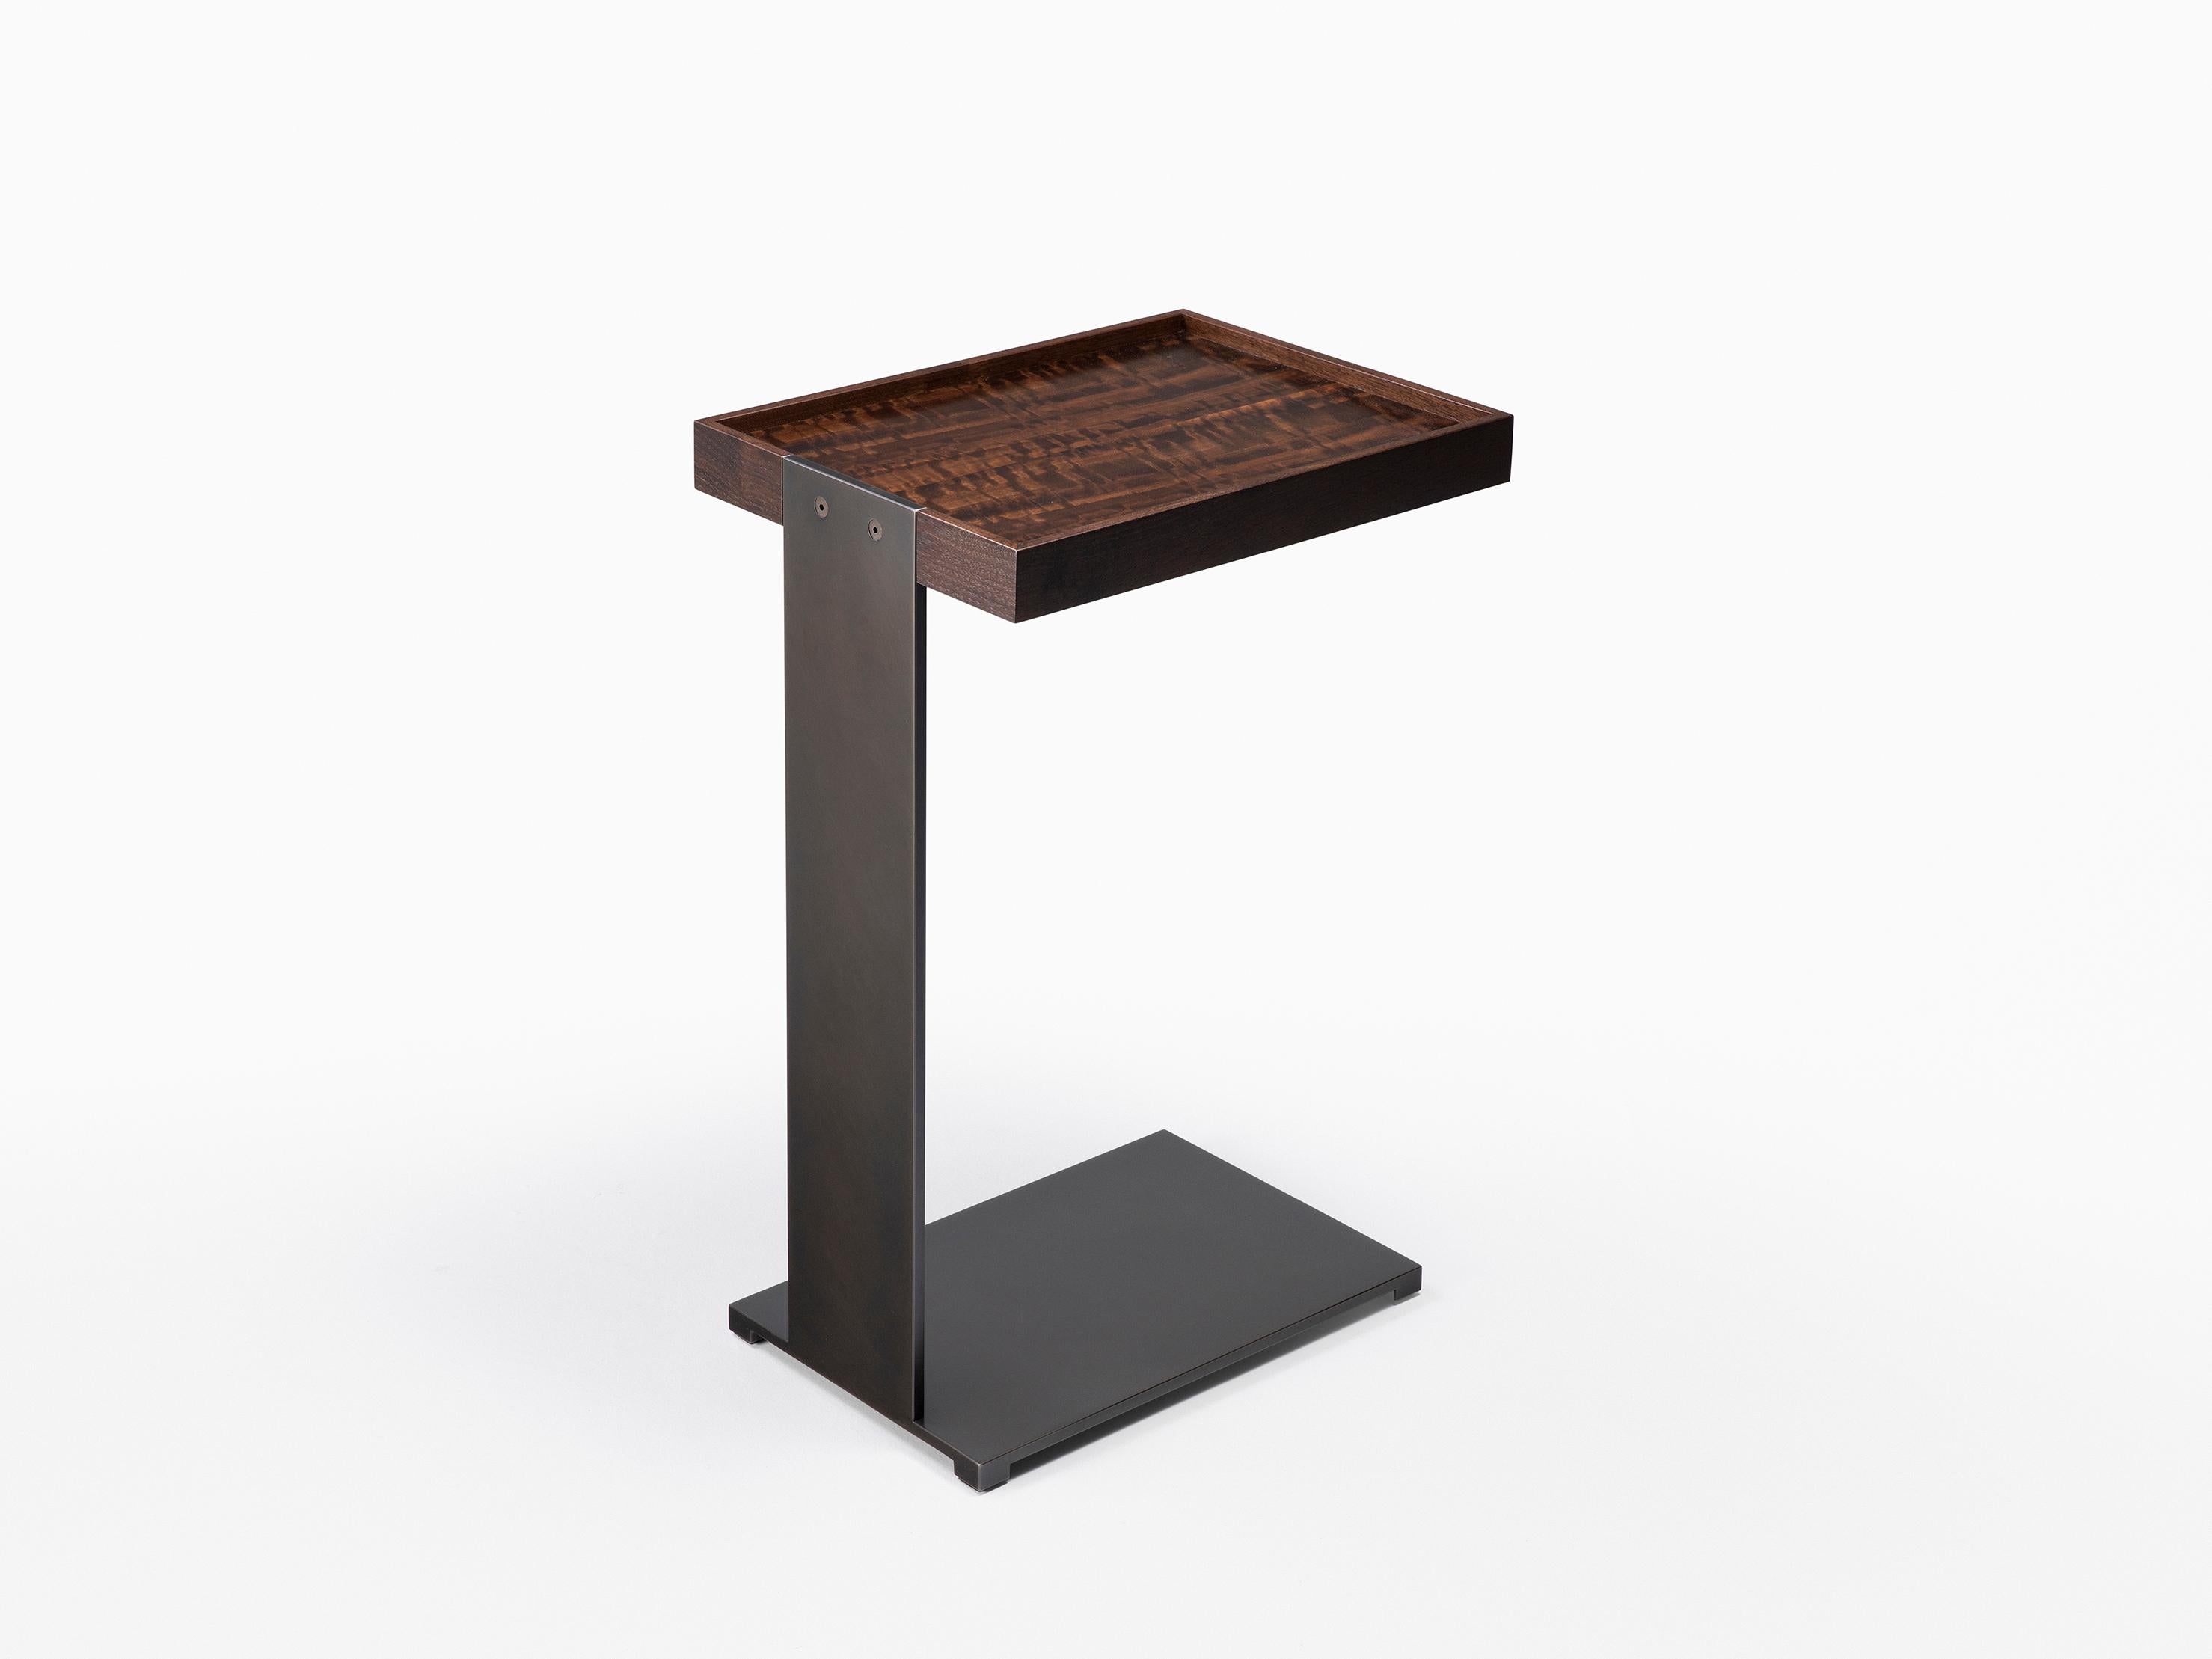 HOLLY HUNT Boulonnais drink table in wood top and metal frame. An angular side table distilled from simple geometry with a cantilevered tray top. Useful when placed hugging a sofa as the perfect spot for a coffee or cocktail. A practical and mobile